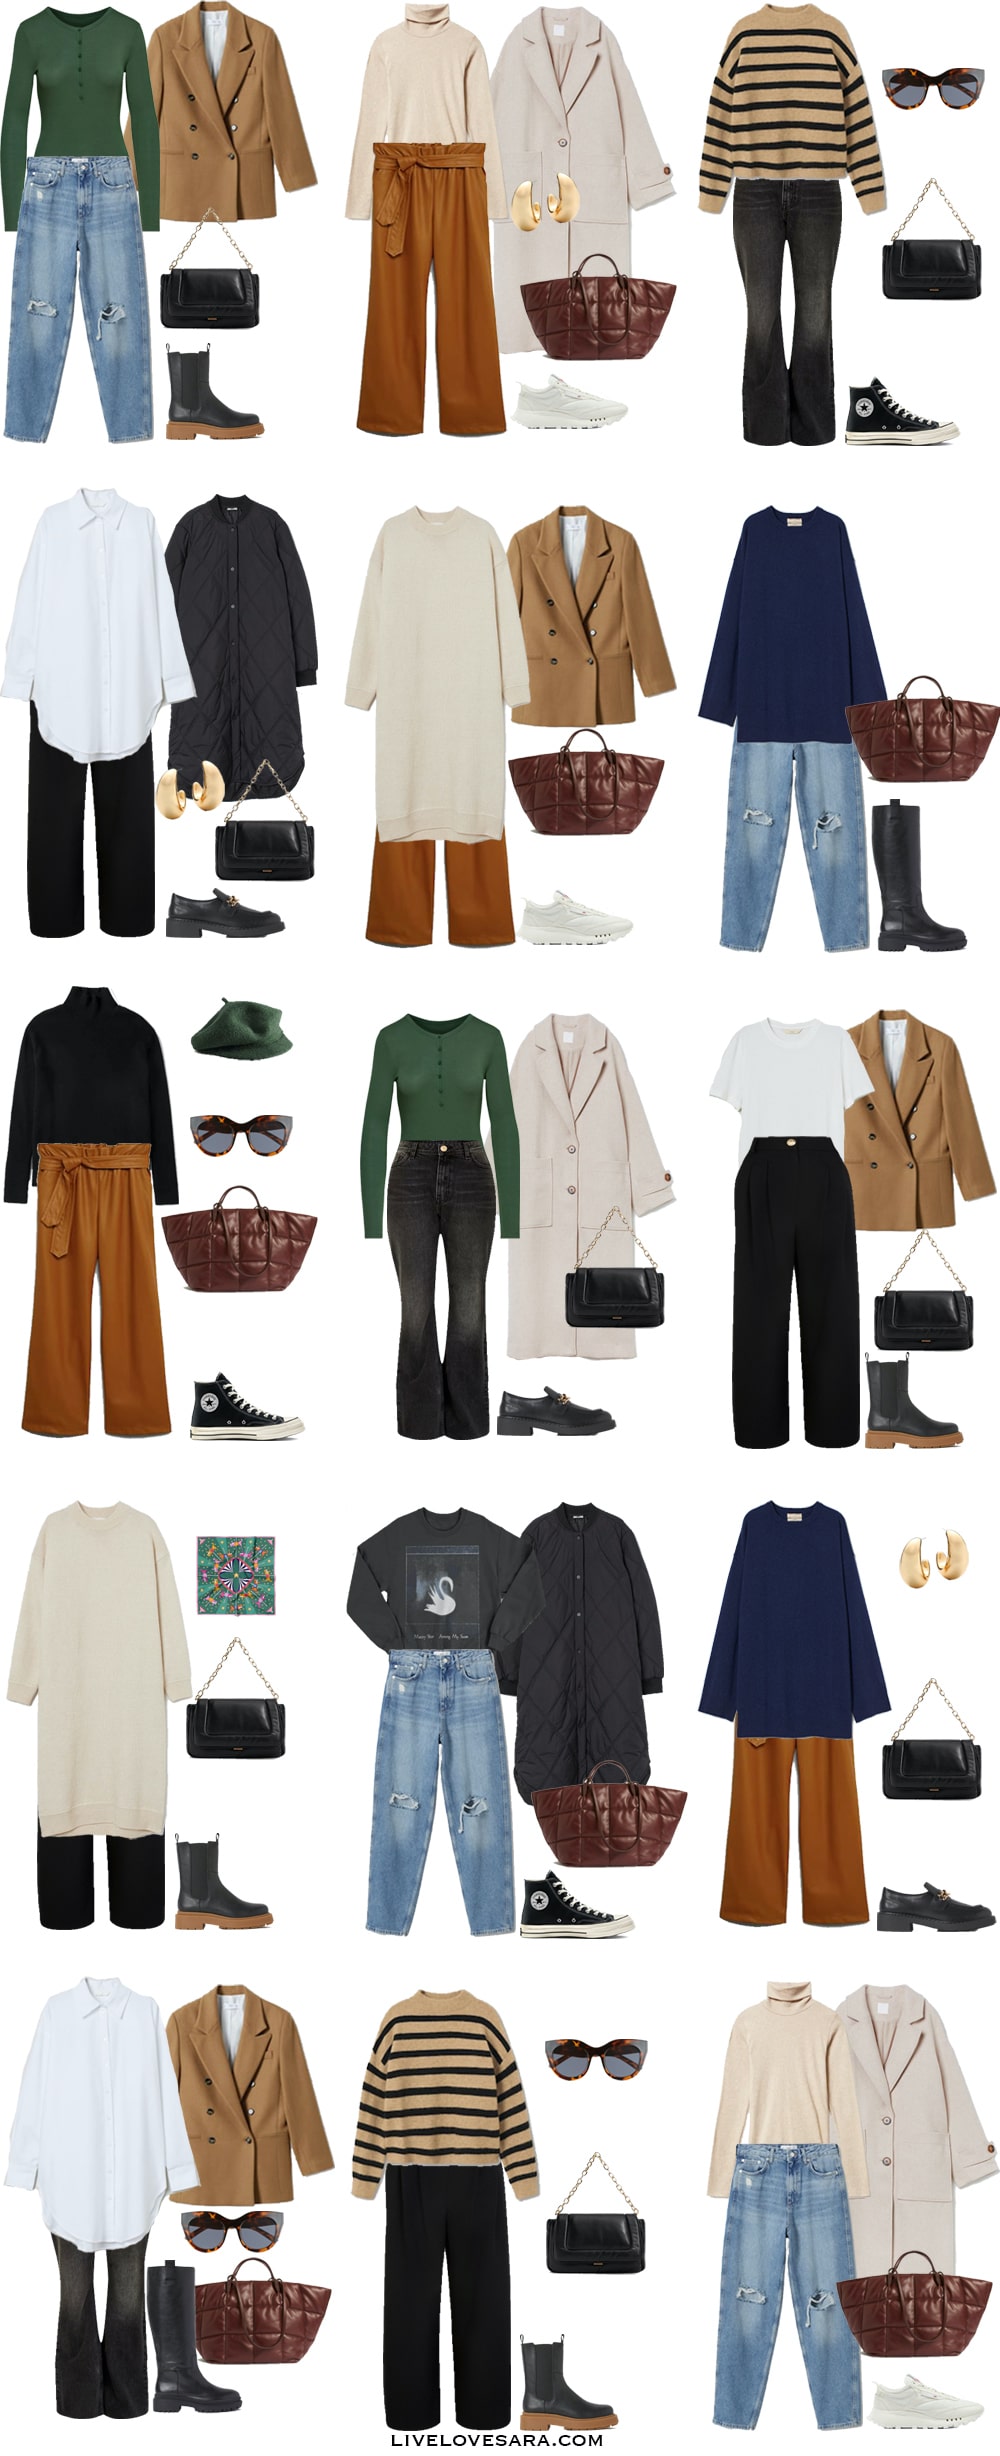 A white background with the pieces for a minimalist capsule wardrobe for fall laid out in 15 outfits.